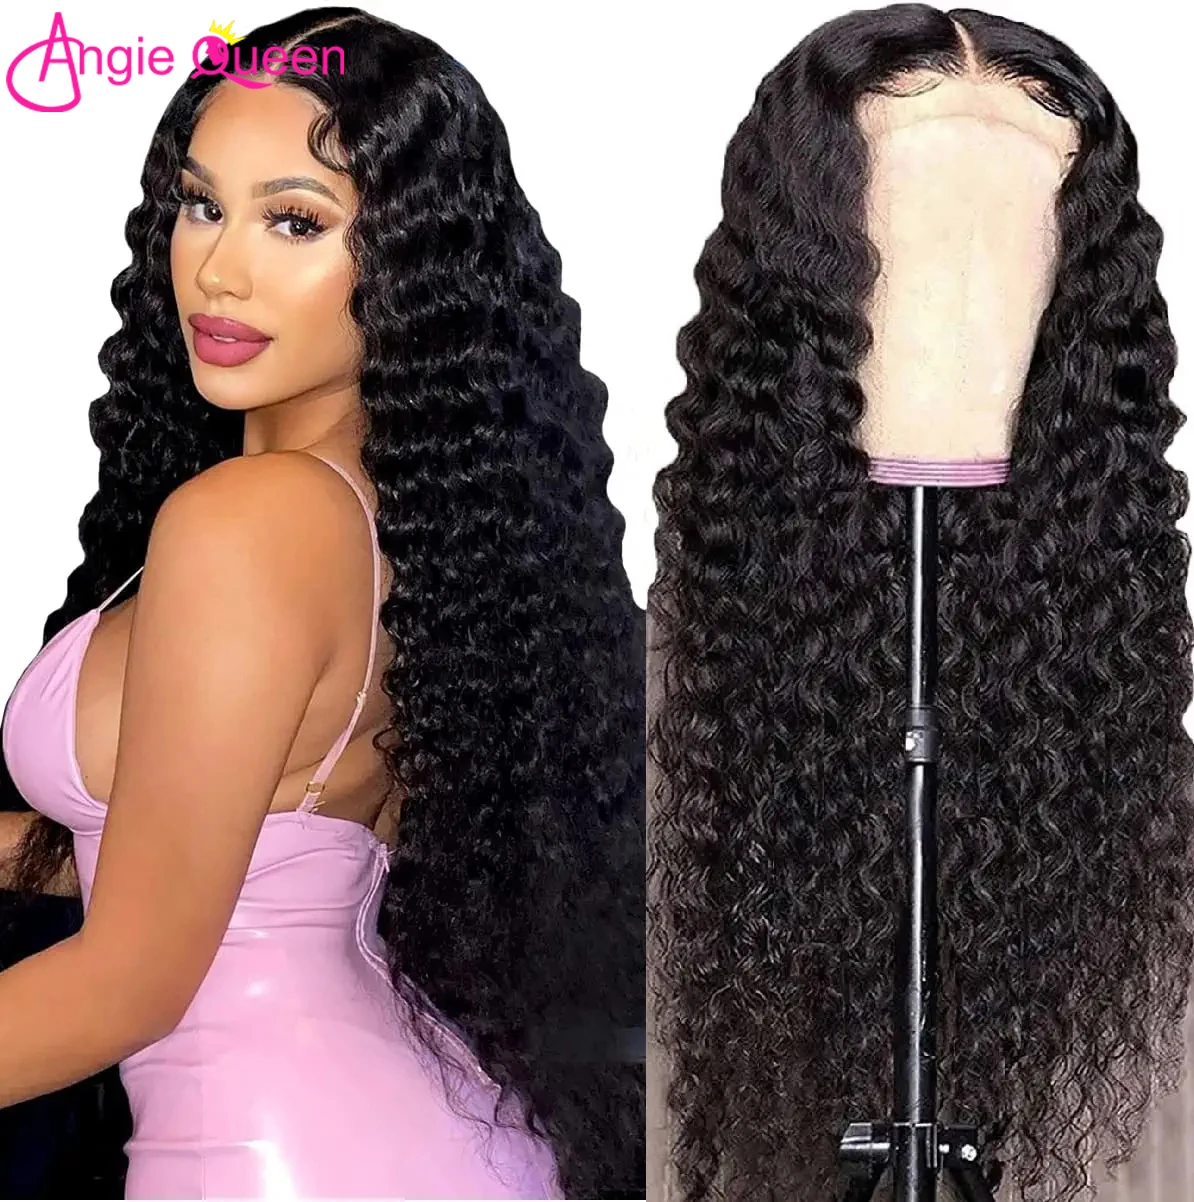 Deep Wave Lace Front Wigs Human Hair 13X4 Lace Front Wig Deep Curly 4x4 Lace Closure Human Hair Wigs For Women With Baby Hair